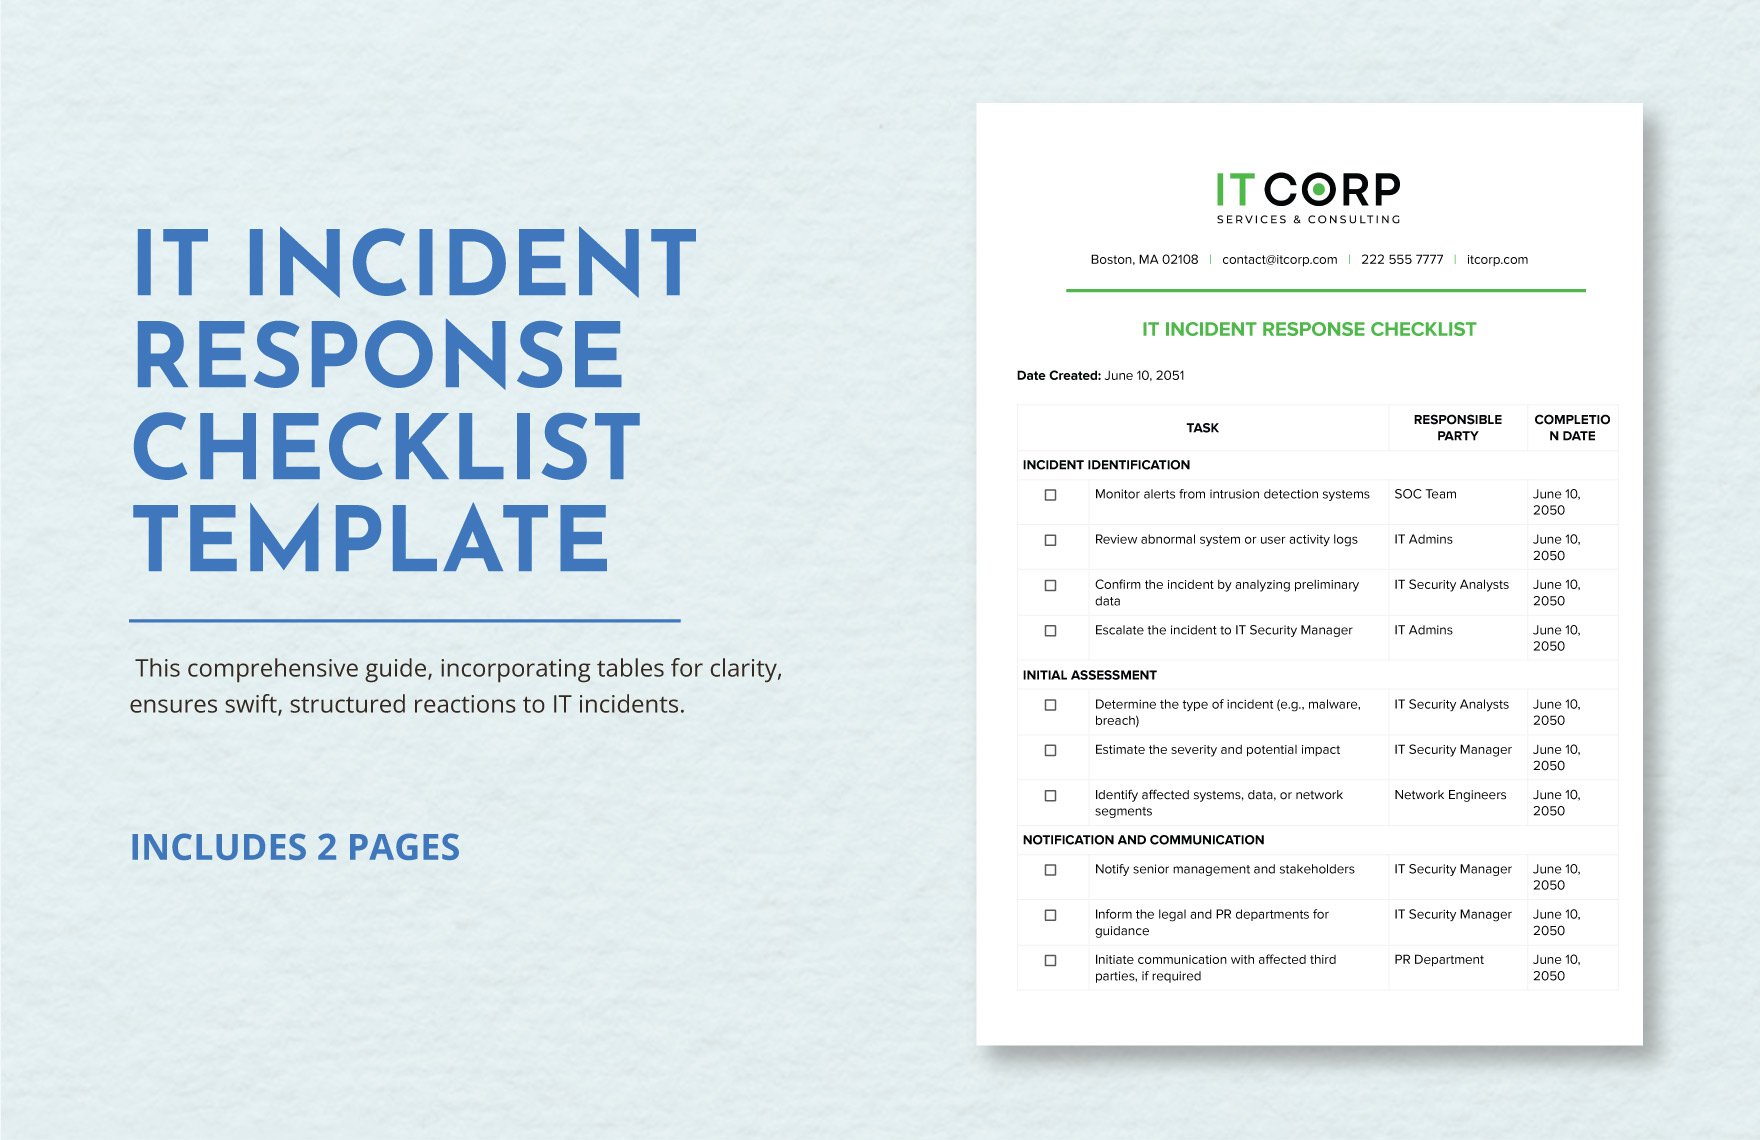 IT Incident Response Checklist Template